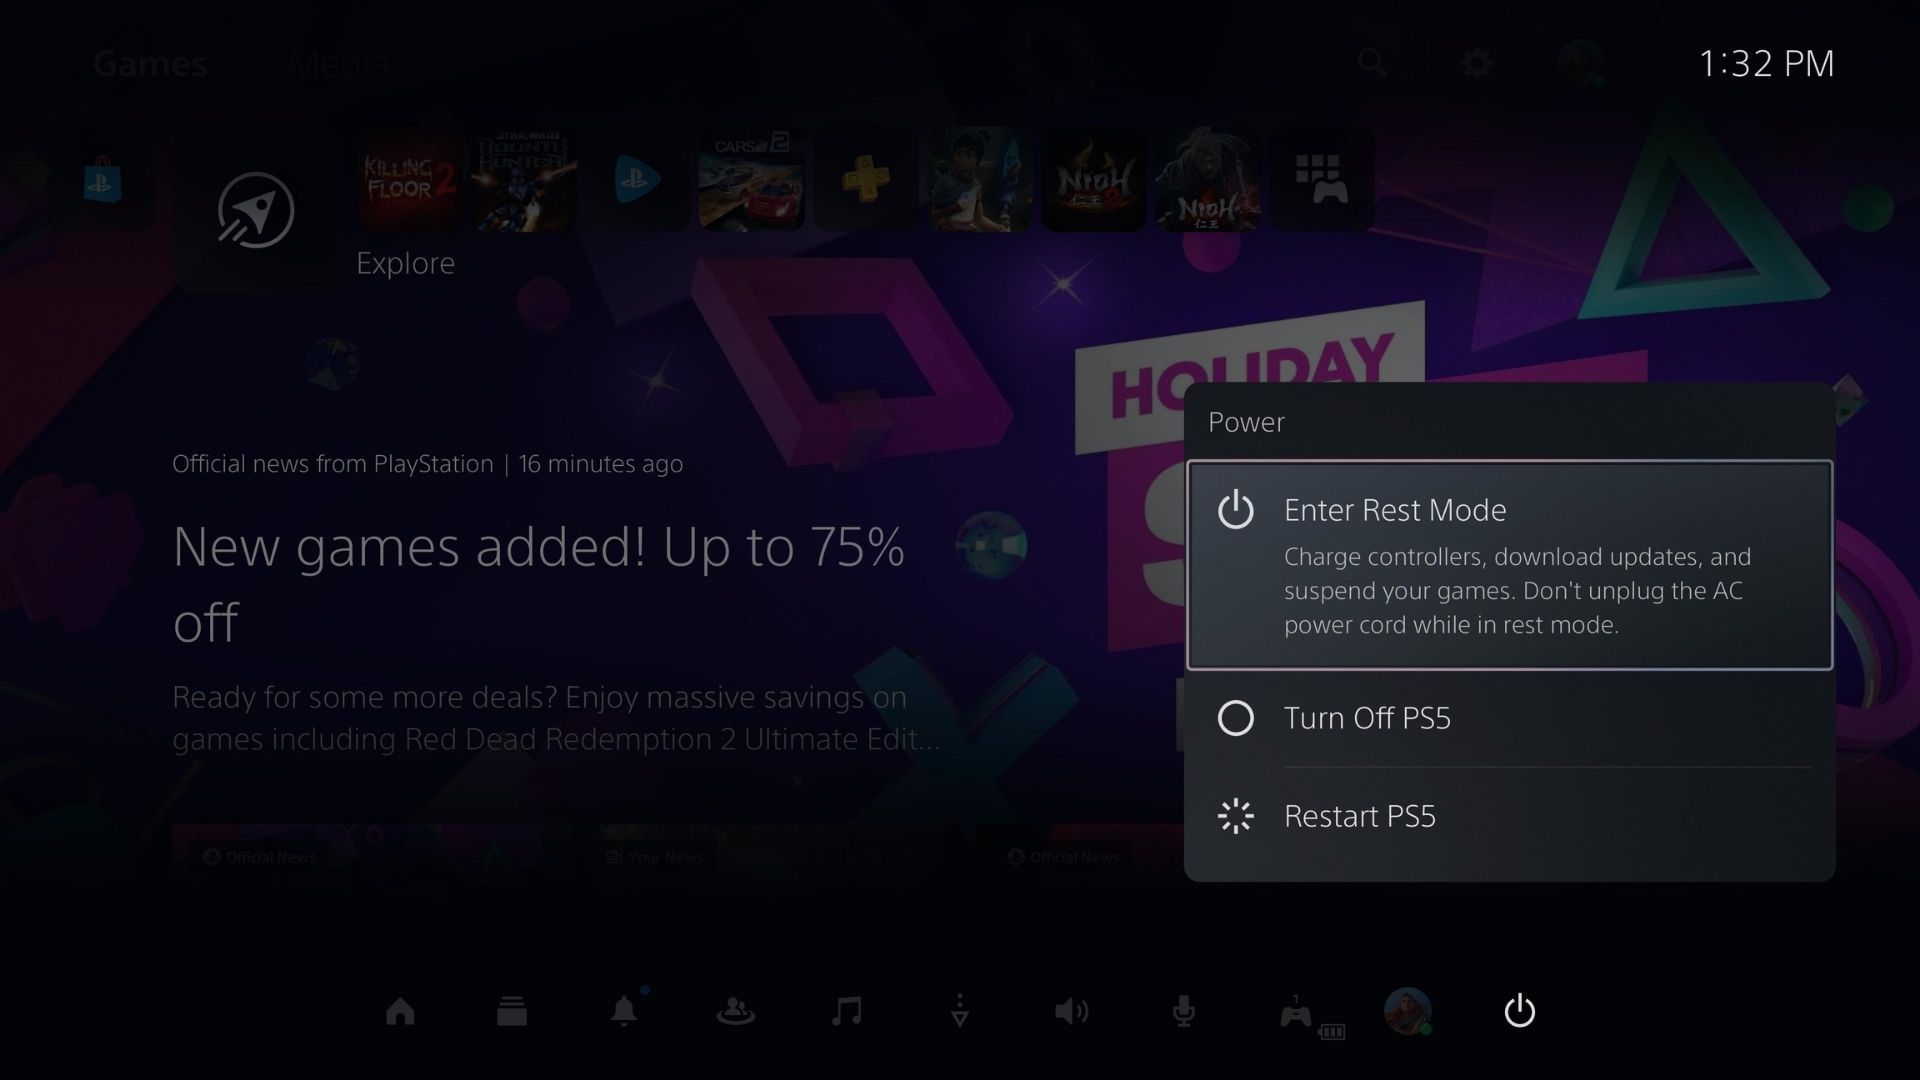 how to choose rest mode option on the ps5